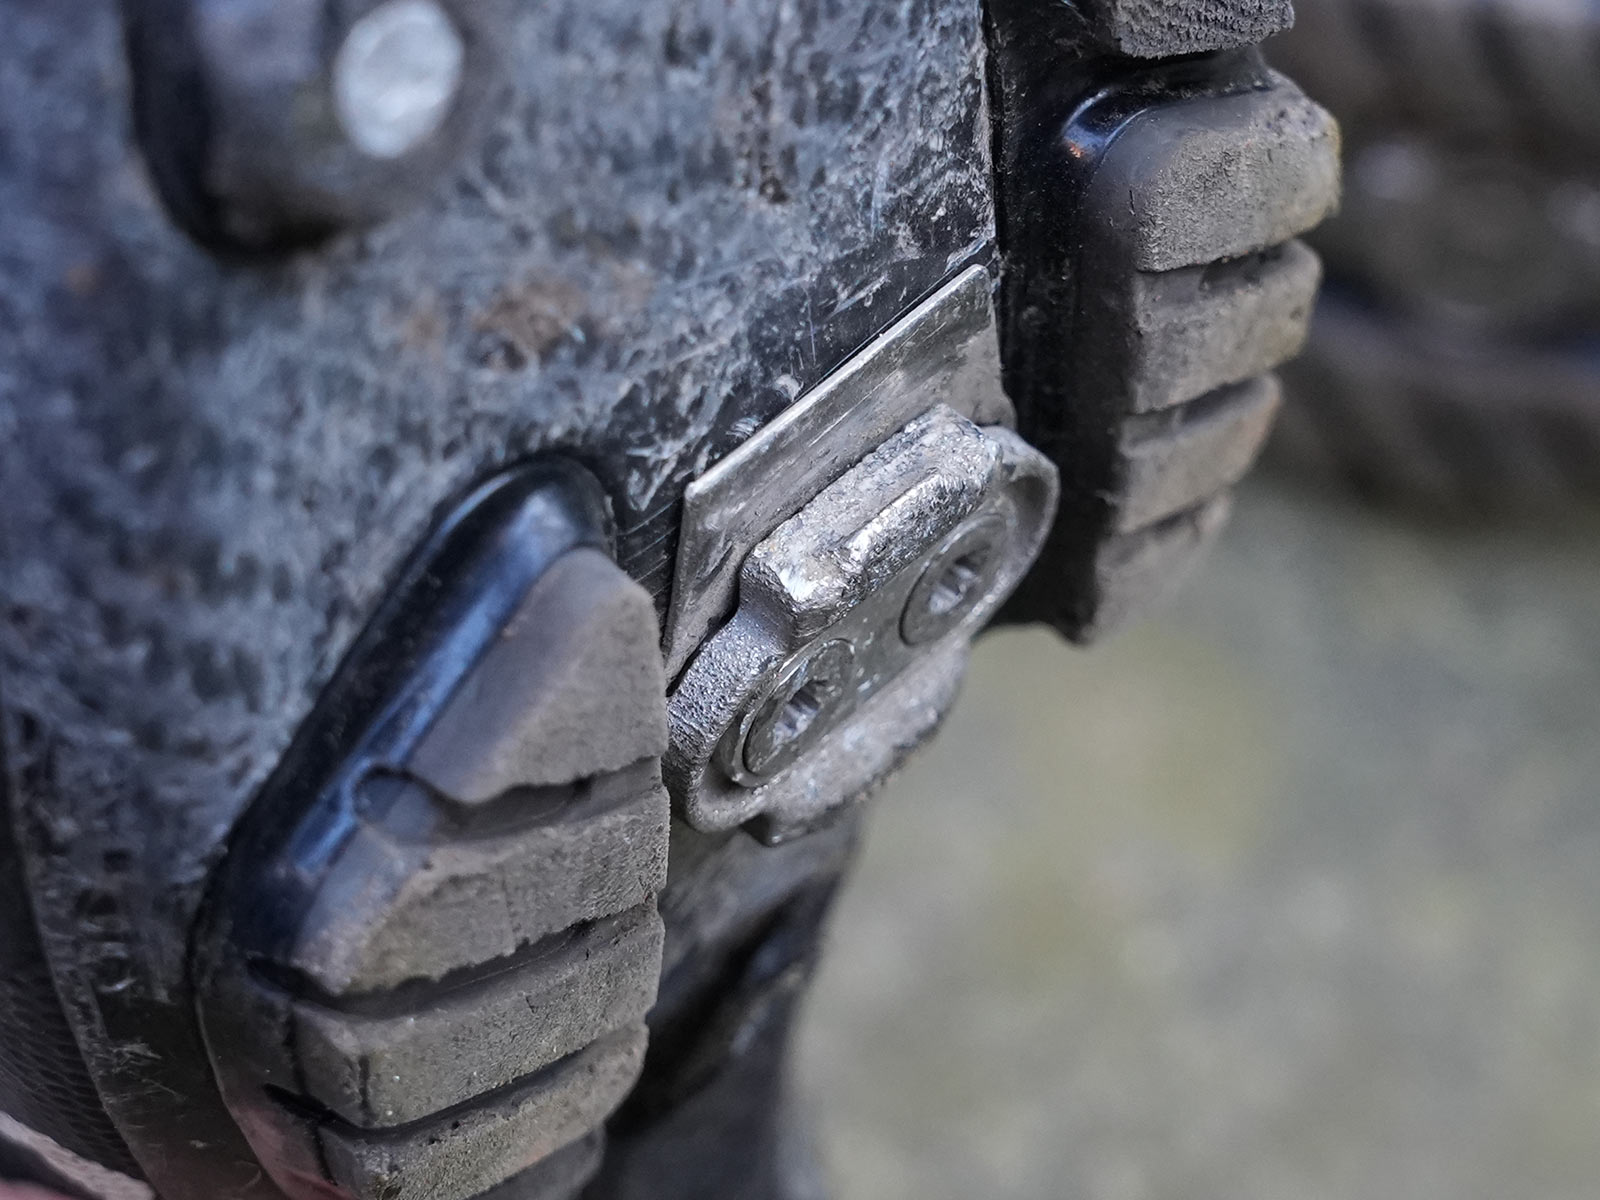 silca titanium cleats for crank brothers pedals shown on MTB shoes